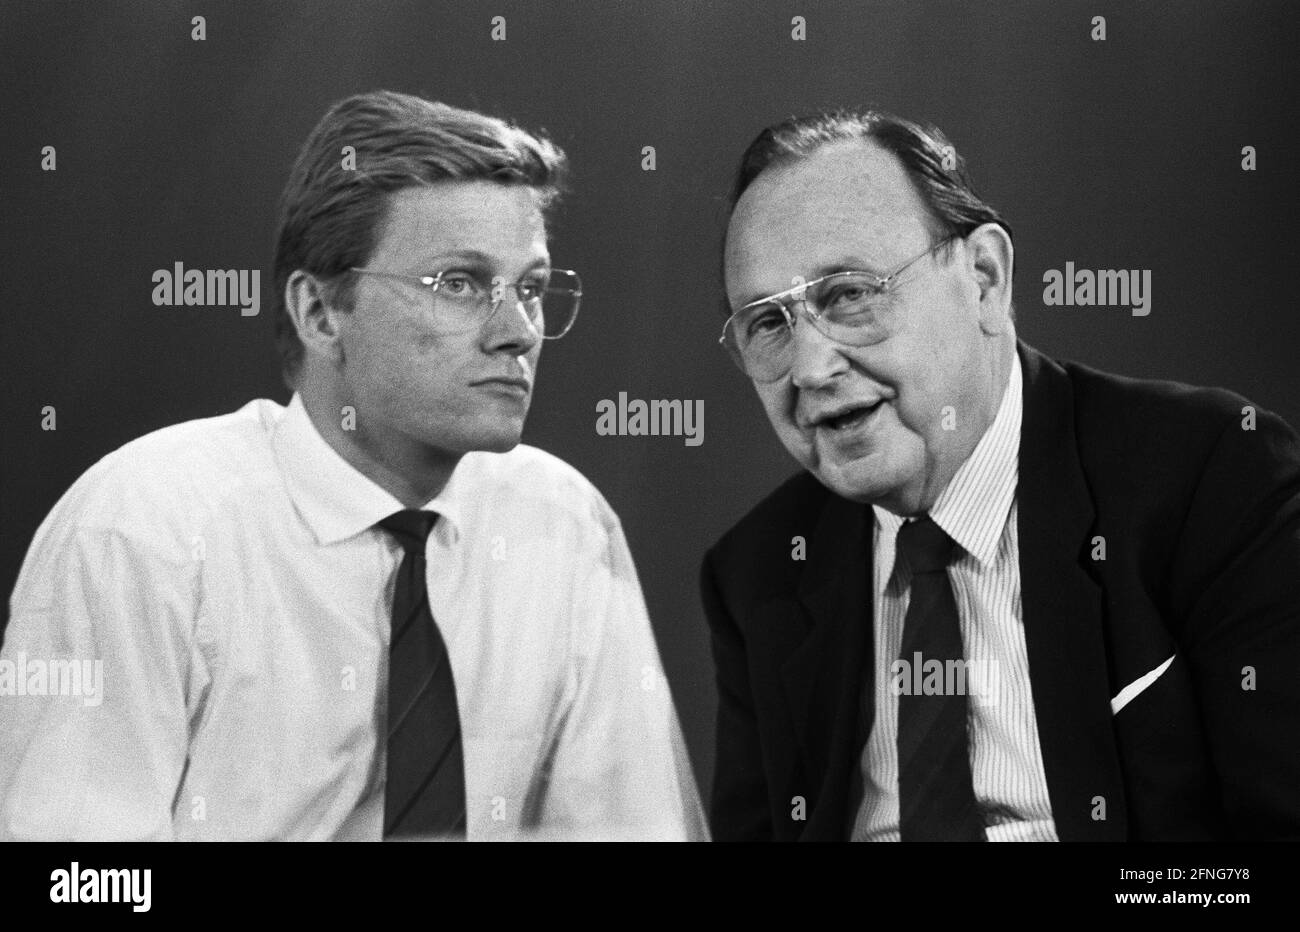 Germany, Duisburg, 22.04.1989. Archive No.: 07-05-25 FDP European Party Conference Photo: Federal Foreign Minister Hans-Dietrich Genscher and Guido Westerwelle [automated translation] Stock Photo